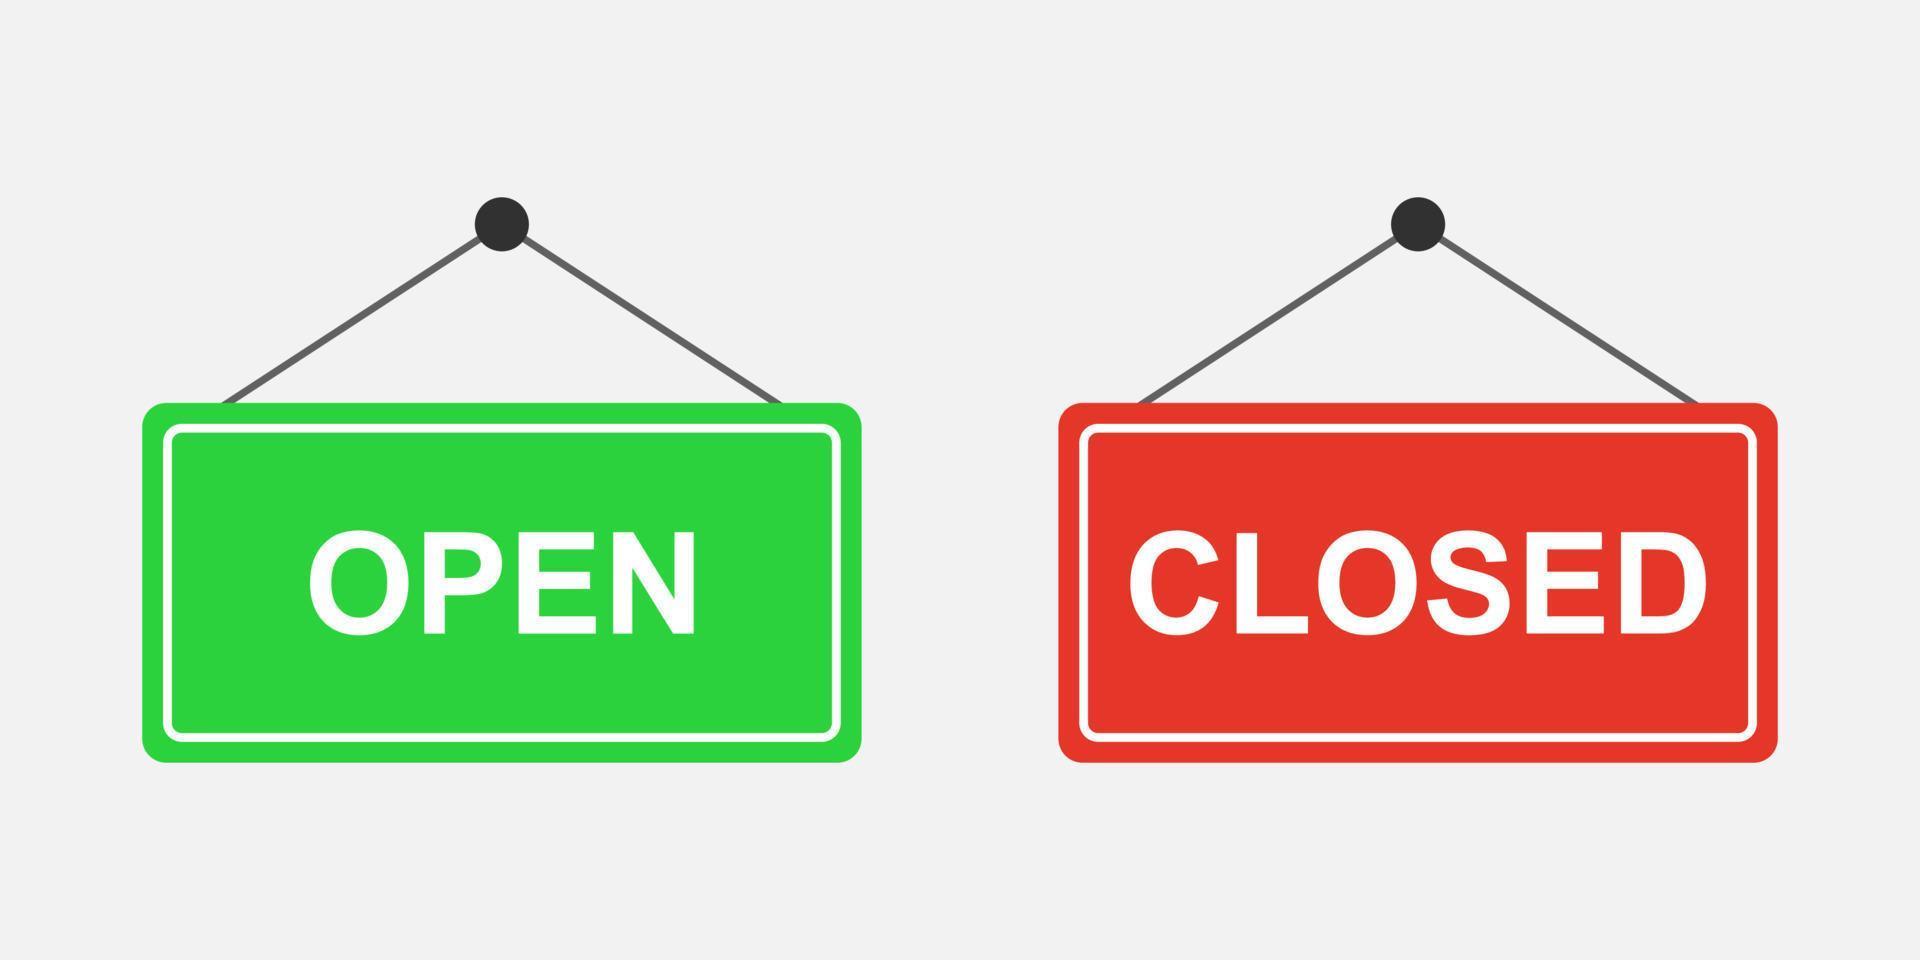 Open door and closed door signs in flat design style isolated on background. vector